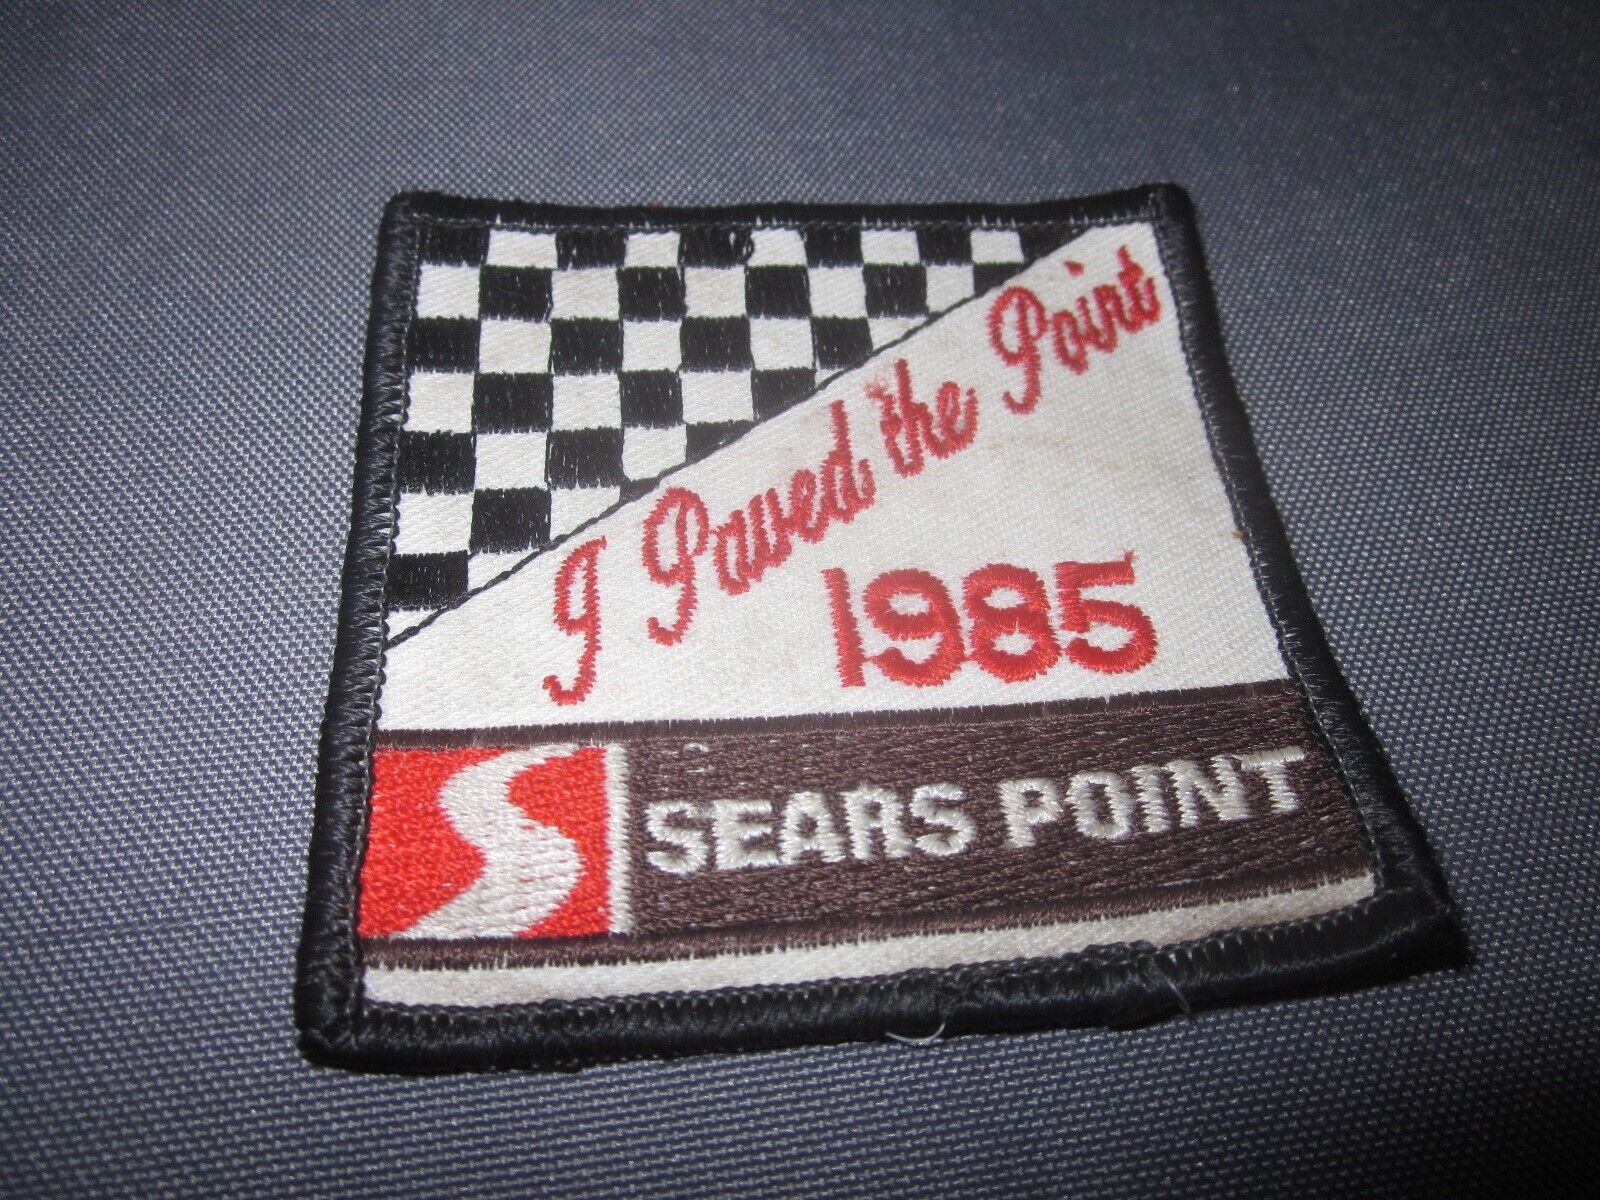 Vintage SEARS POINT I PAVED THE PATCH 1985 RARE racing PATCH